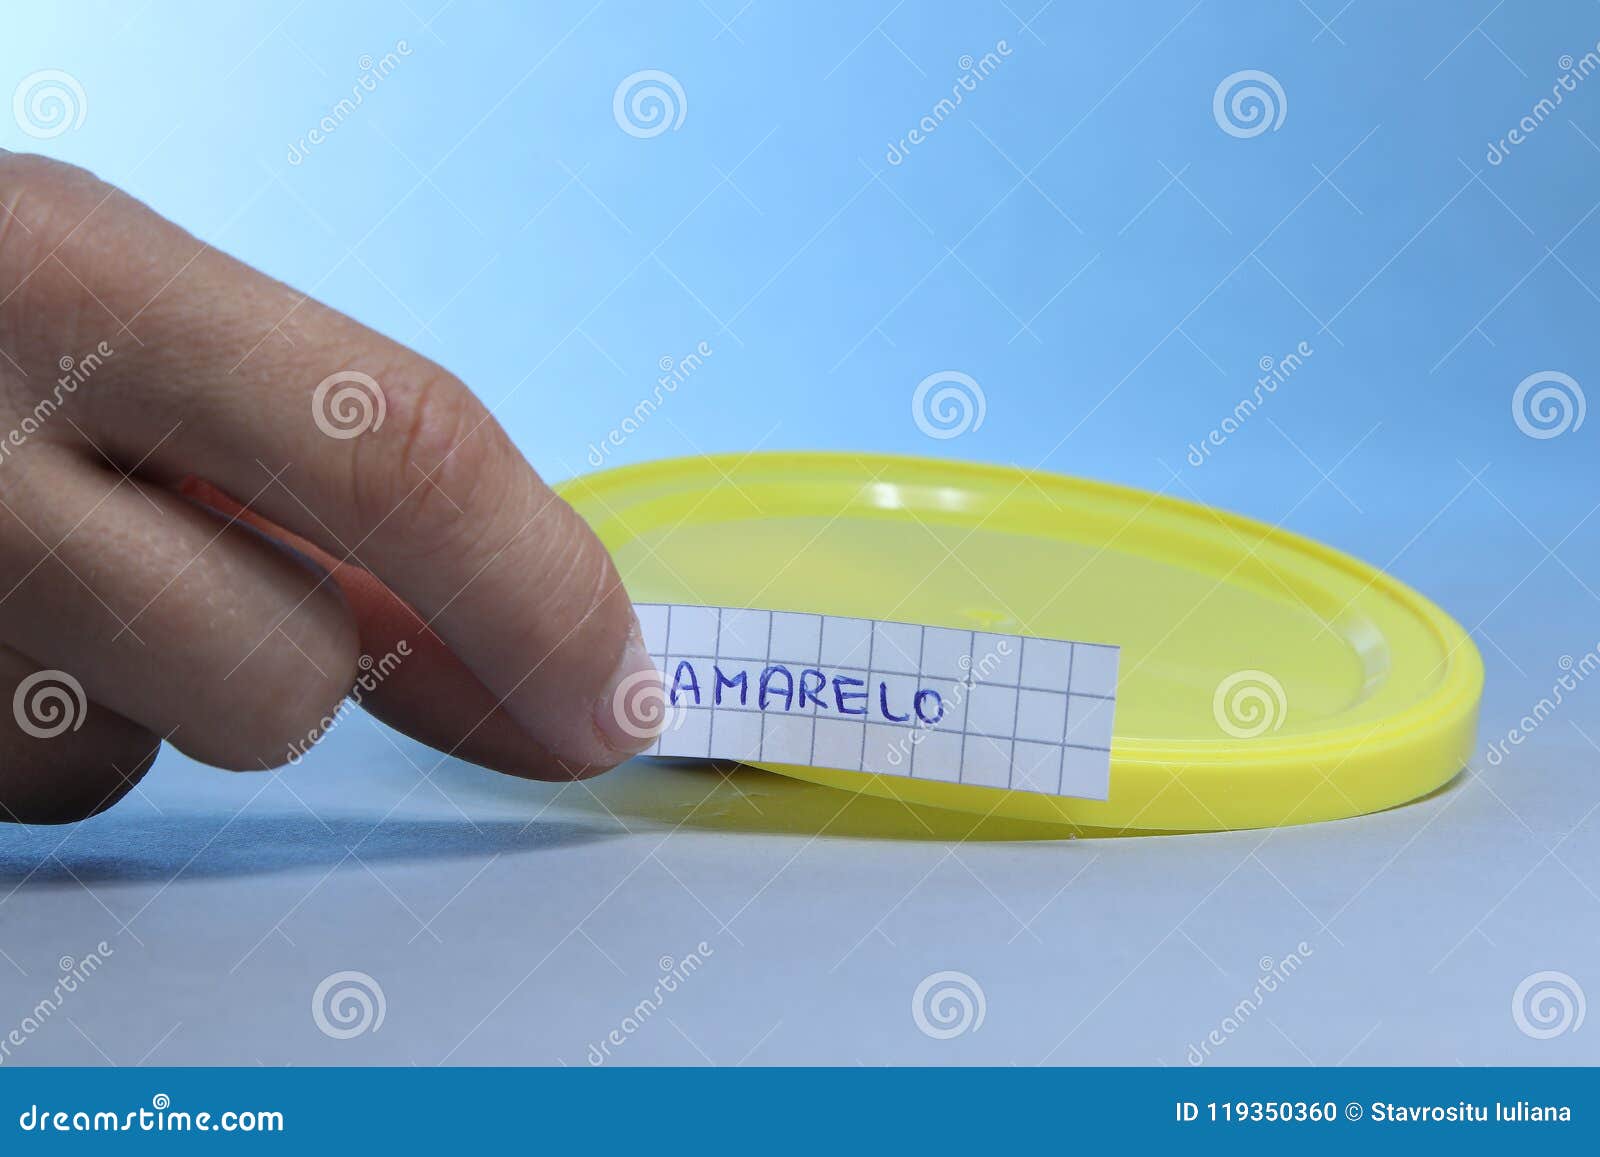 yellow lid with small blank note. amarelo the portuguese word for yellow